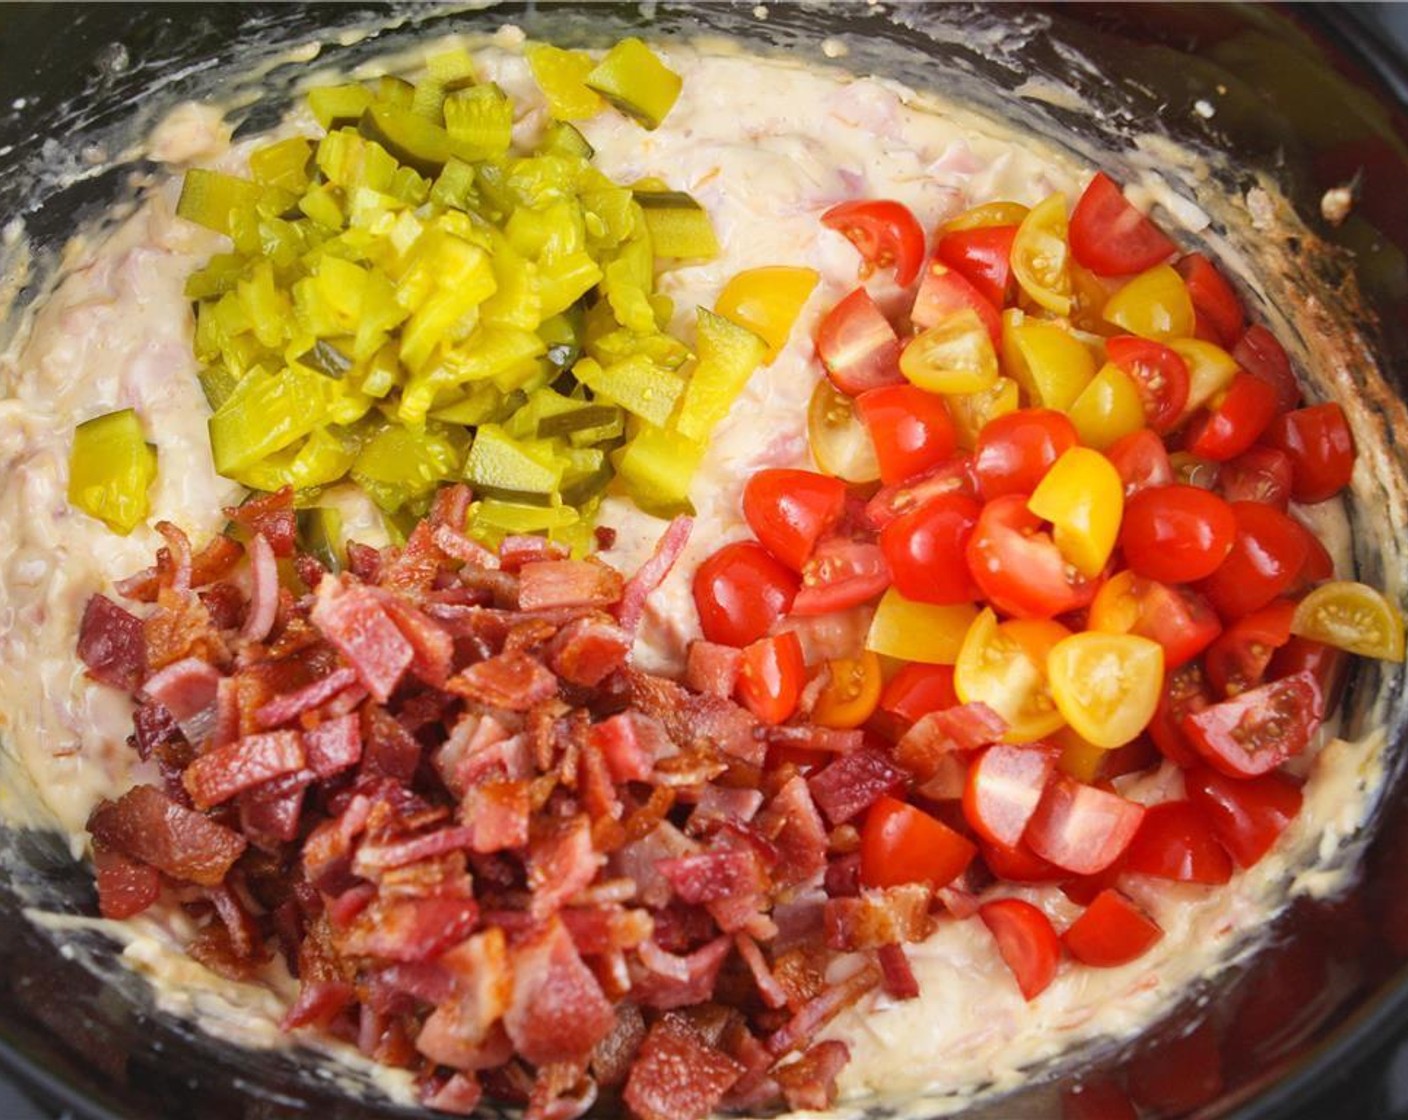 step 4 Add the bacon pieces, tomatoes and pickles. Stir and heat for 10 additional minutes on low heat.